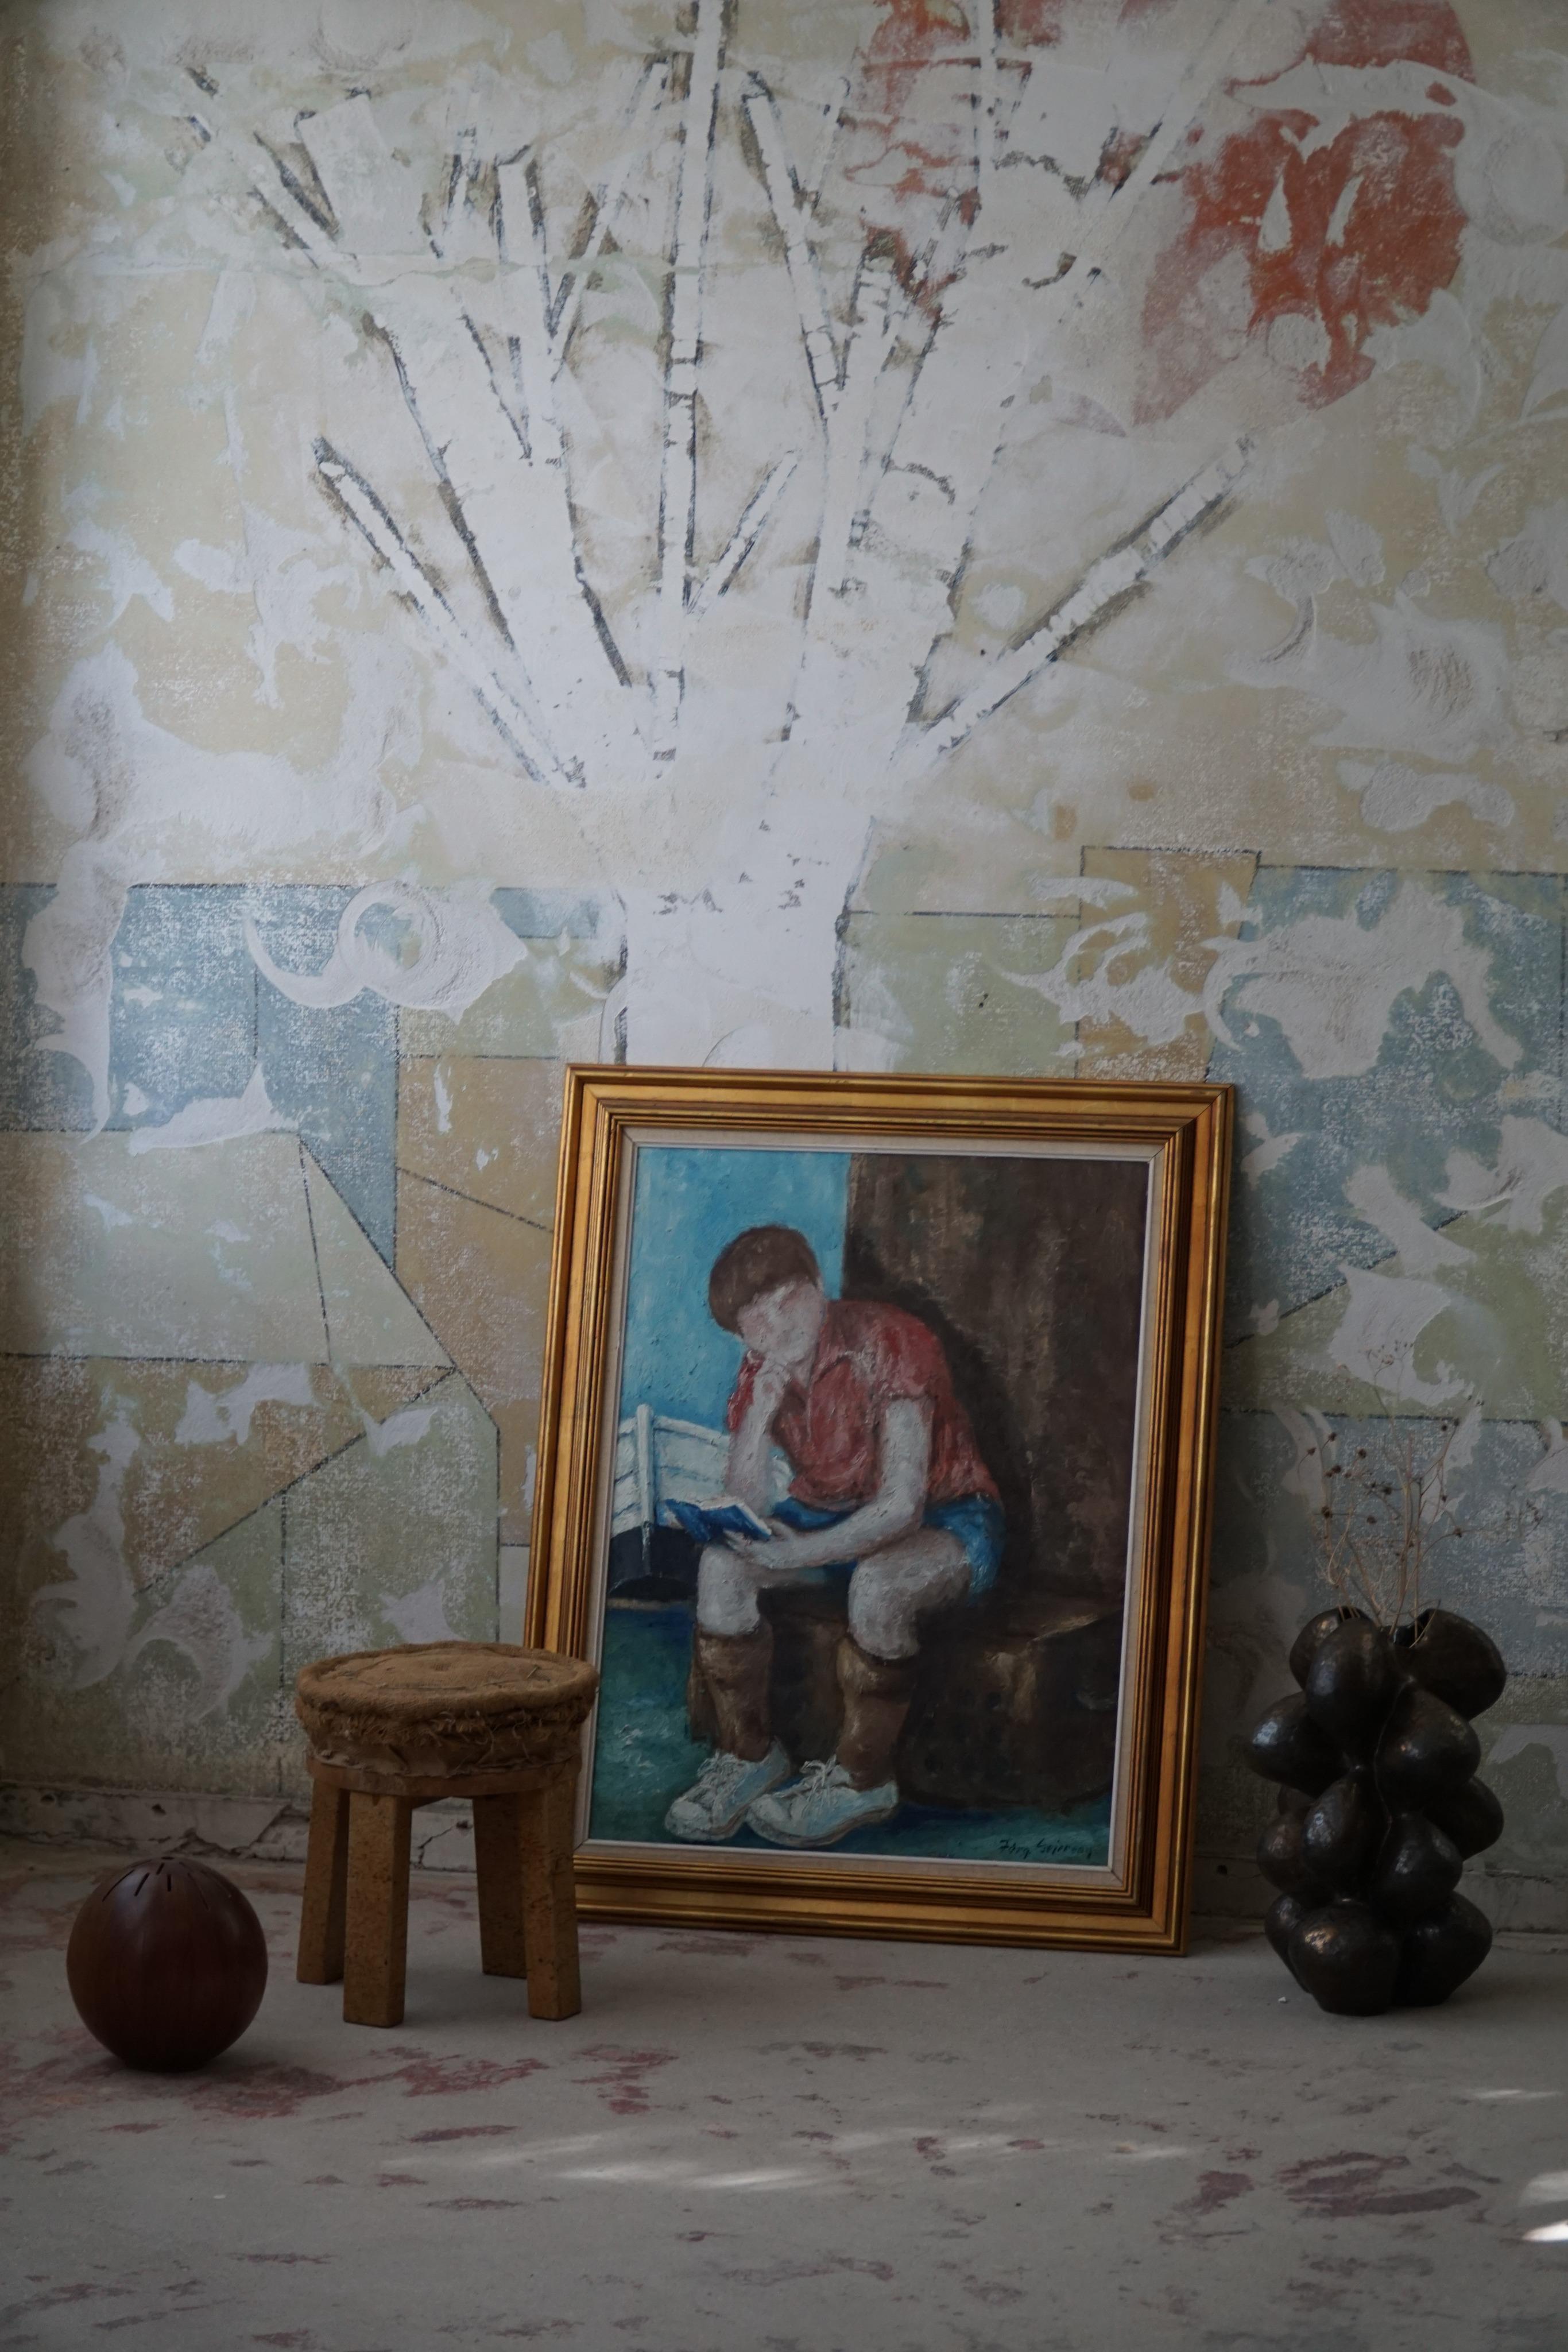 Presenting an enchanting oil painting by the Danish artist Jørgen Sejersen, made in between 1960-1980s. 
This particular artwork captures a peaceful scene, showcasing a young boy immersed in the interesting world of literature, resting a top a